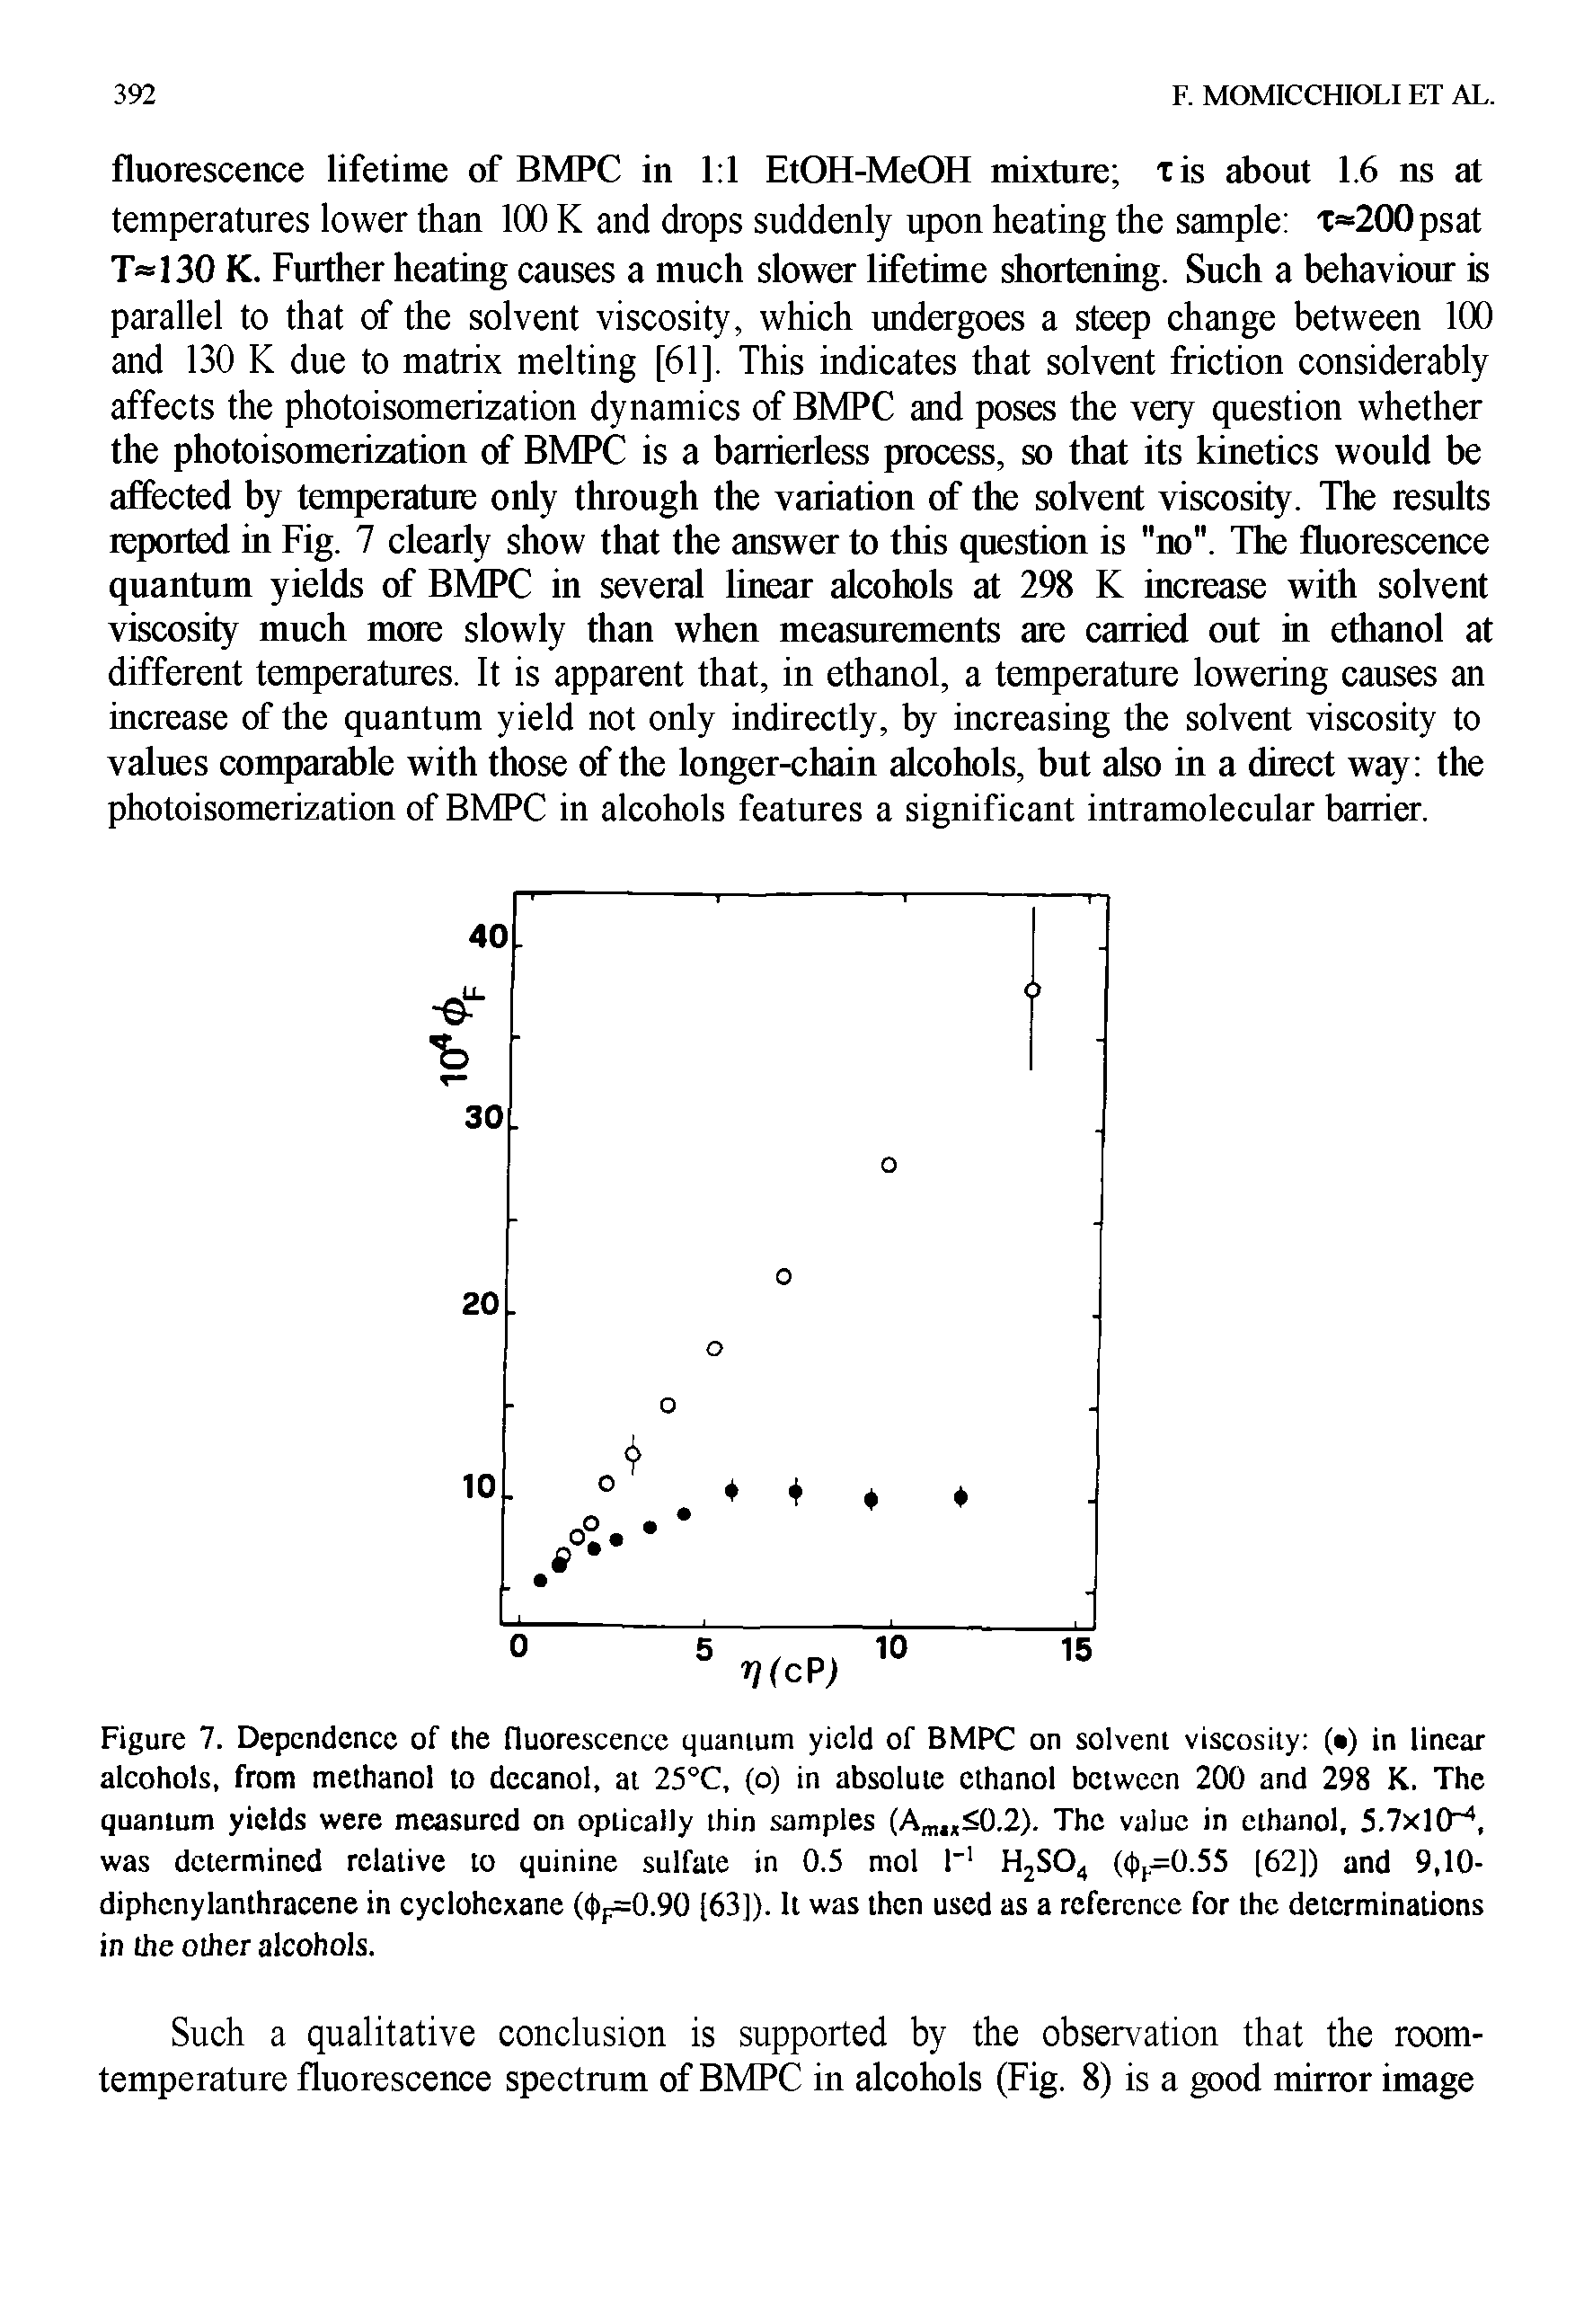 Figure 7. Dependence of the fluorescence quamum yield of BMPC on solvent viscosity ( ) in linear alcohols, from methanol to dccanol, at 25°C, (o) in absolute ethanol between 200 and 298 K. The quantum yields were measured on optically thin samples (Am <0.2). The value in ethanol, 5.7x10, was determined relative to quinine sulfate in 0.5 mol 1" HjSO ((j)p=0.55 [62]) and 9,10-diphenylanthracene in cyclohexane (4ip=0.90 [63]). It was then used as a reference for the determinations in the other alcohols.